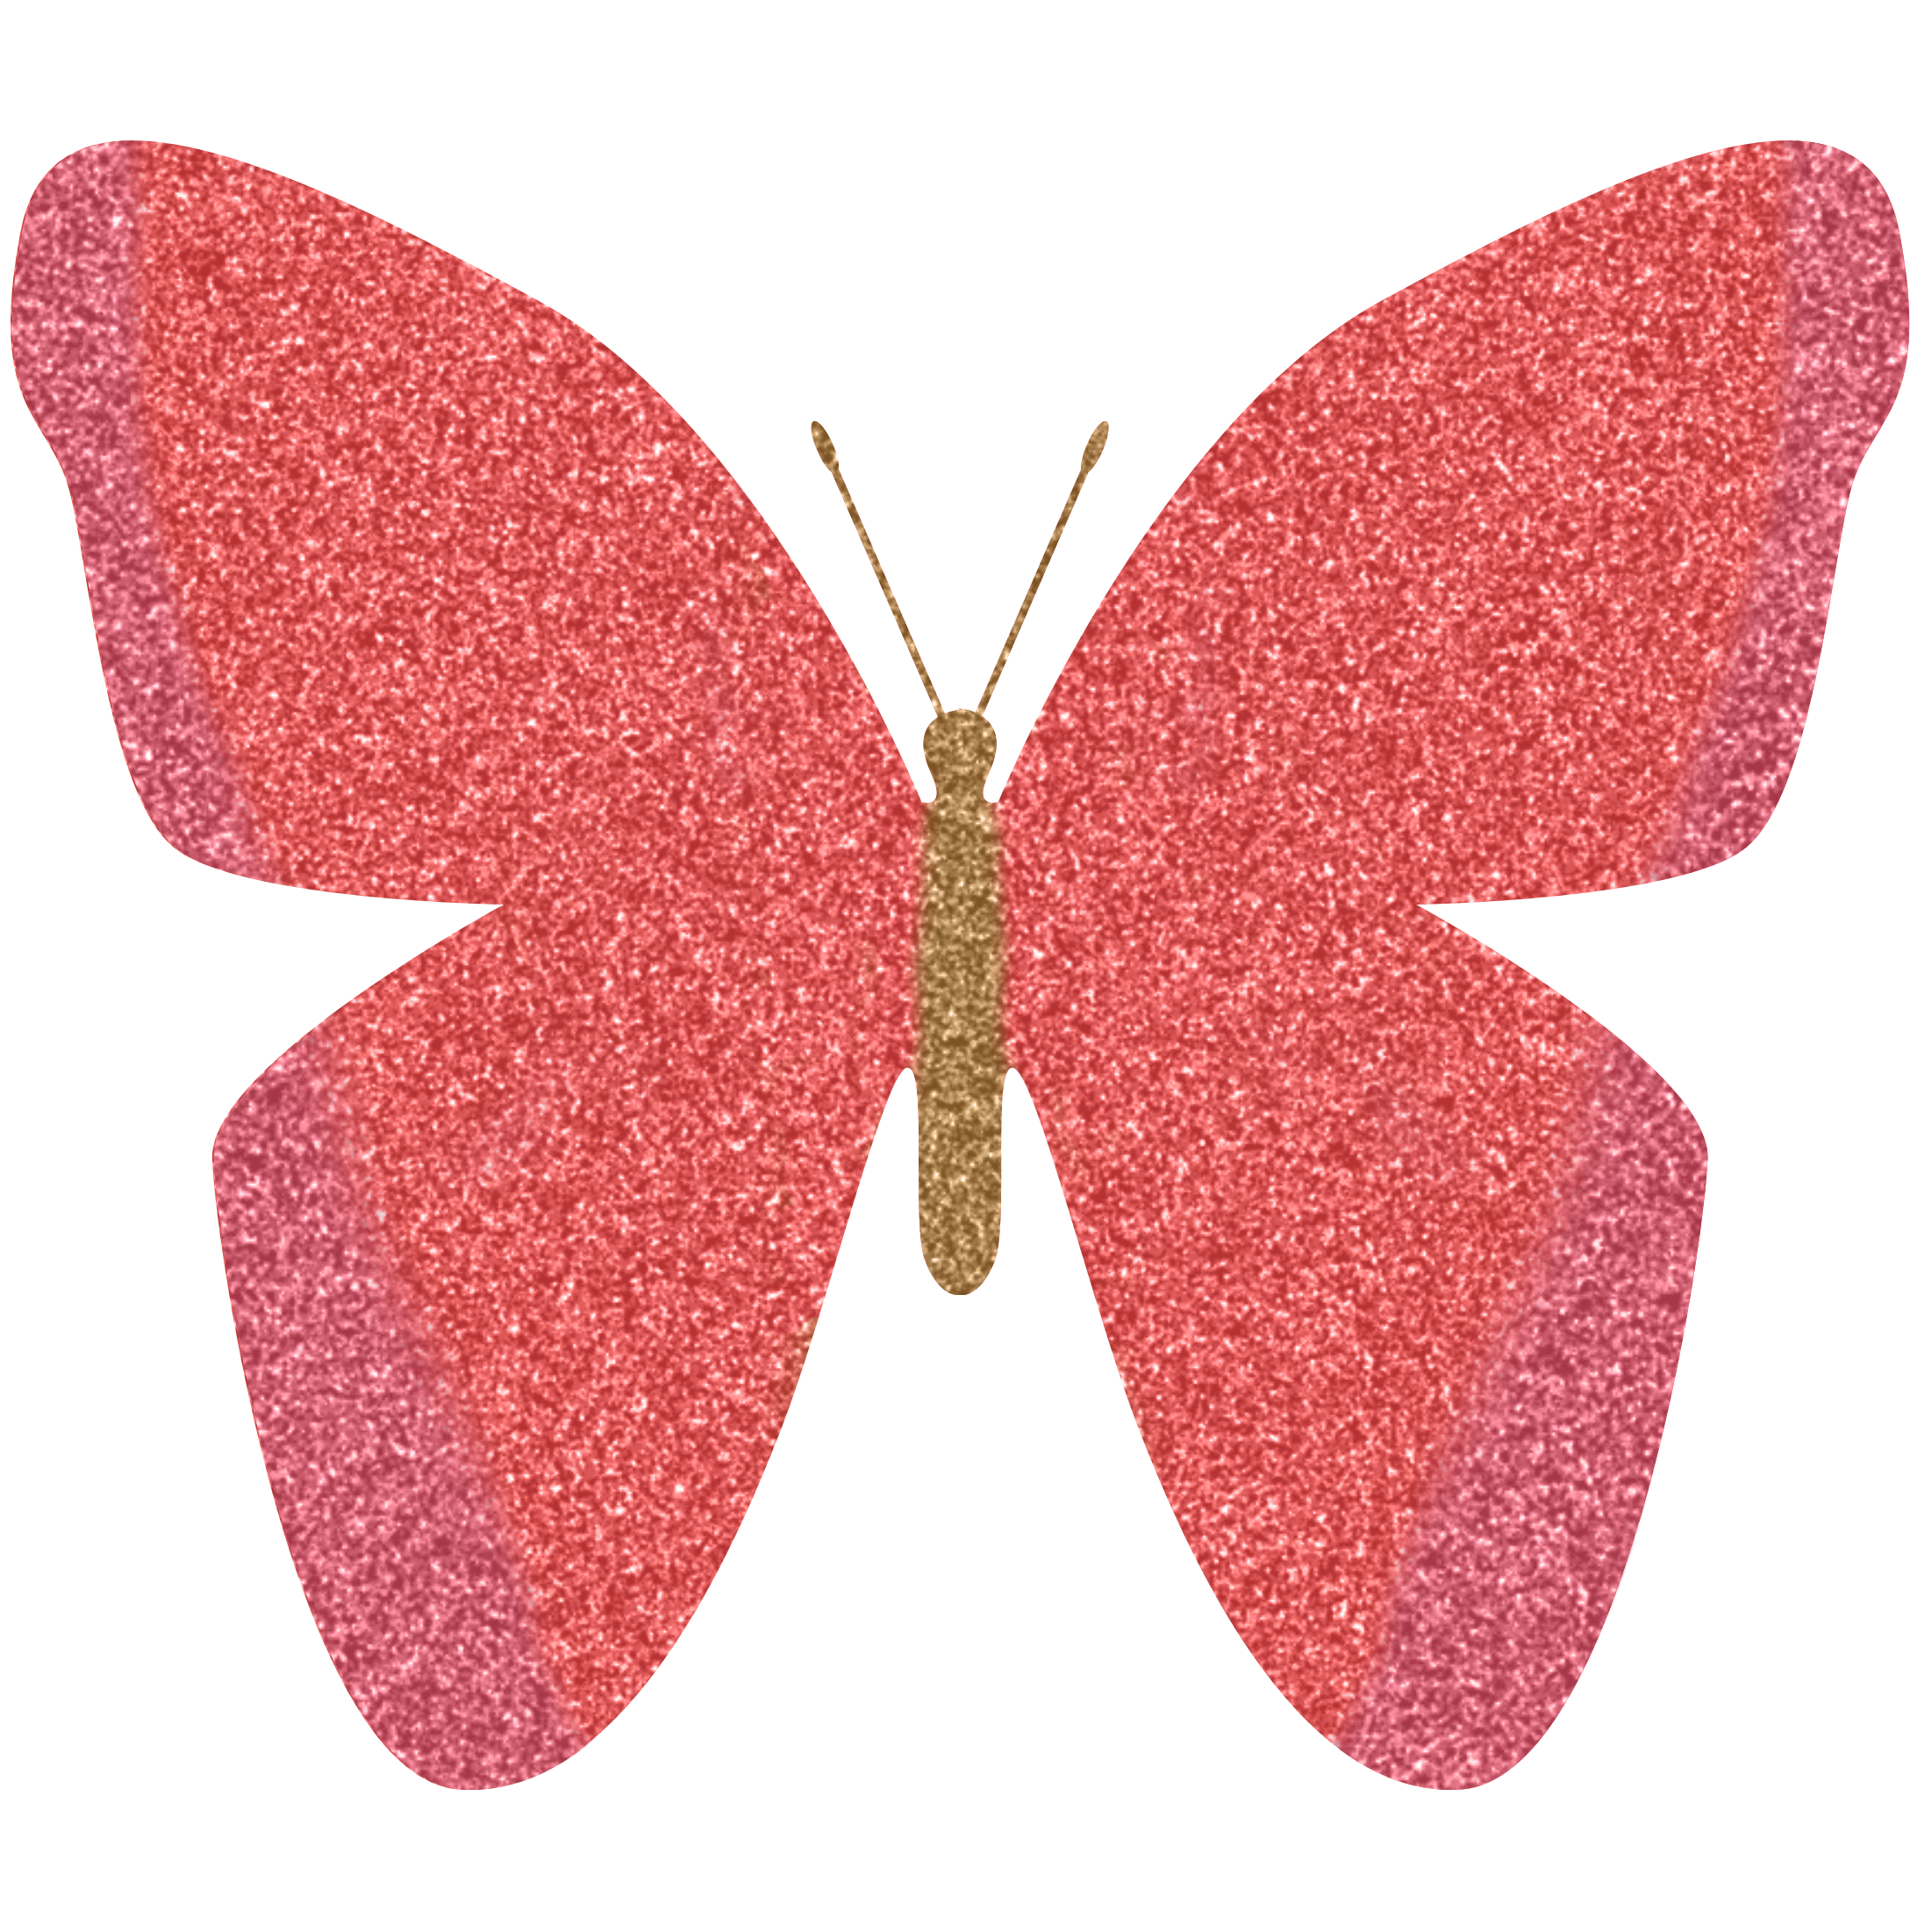 Pink Butterfly Clipart | Free Download Clip Art | Free Clip Art ...